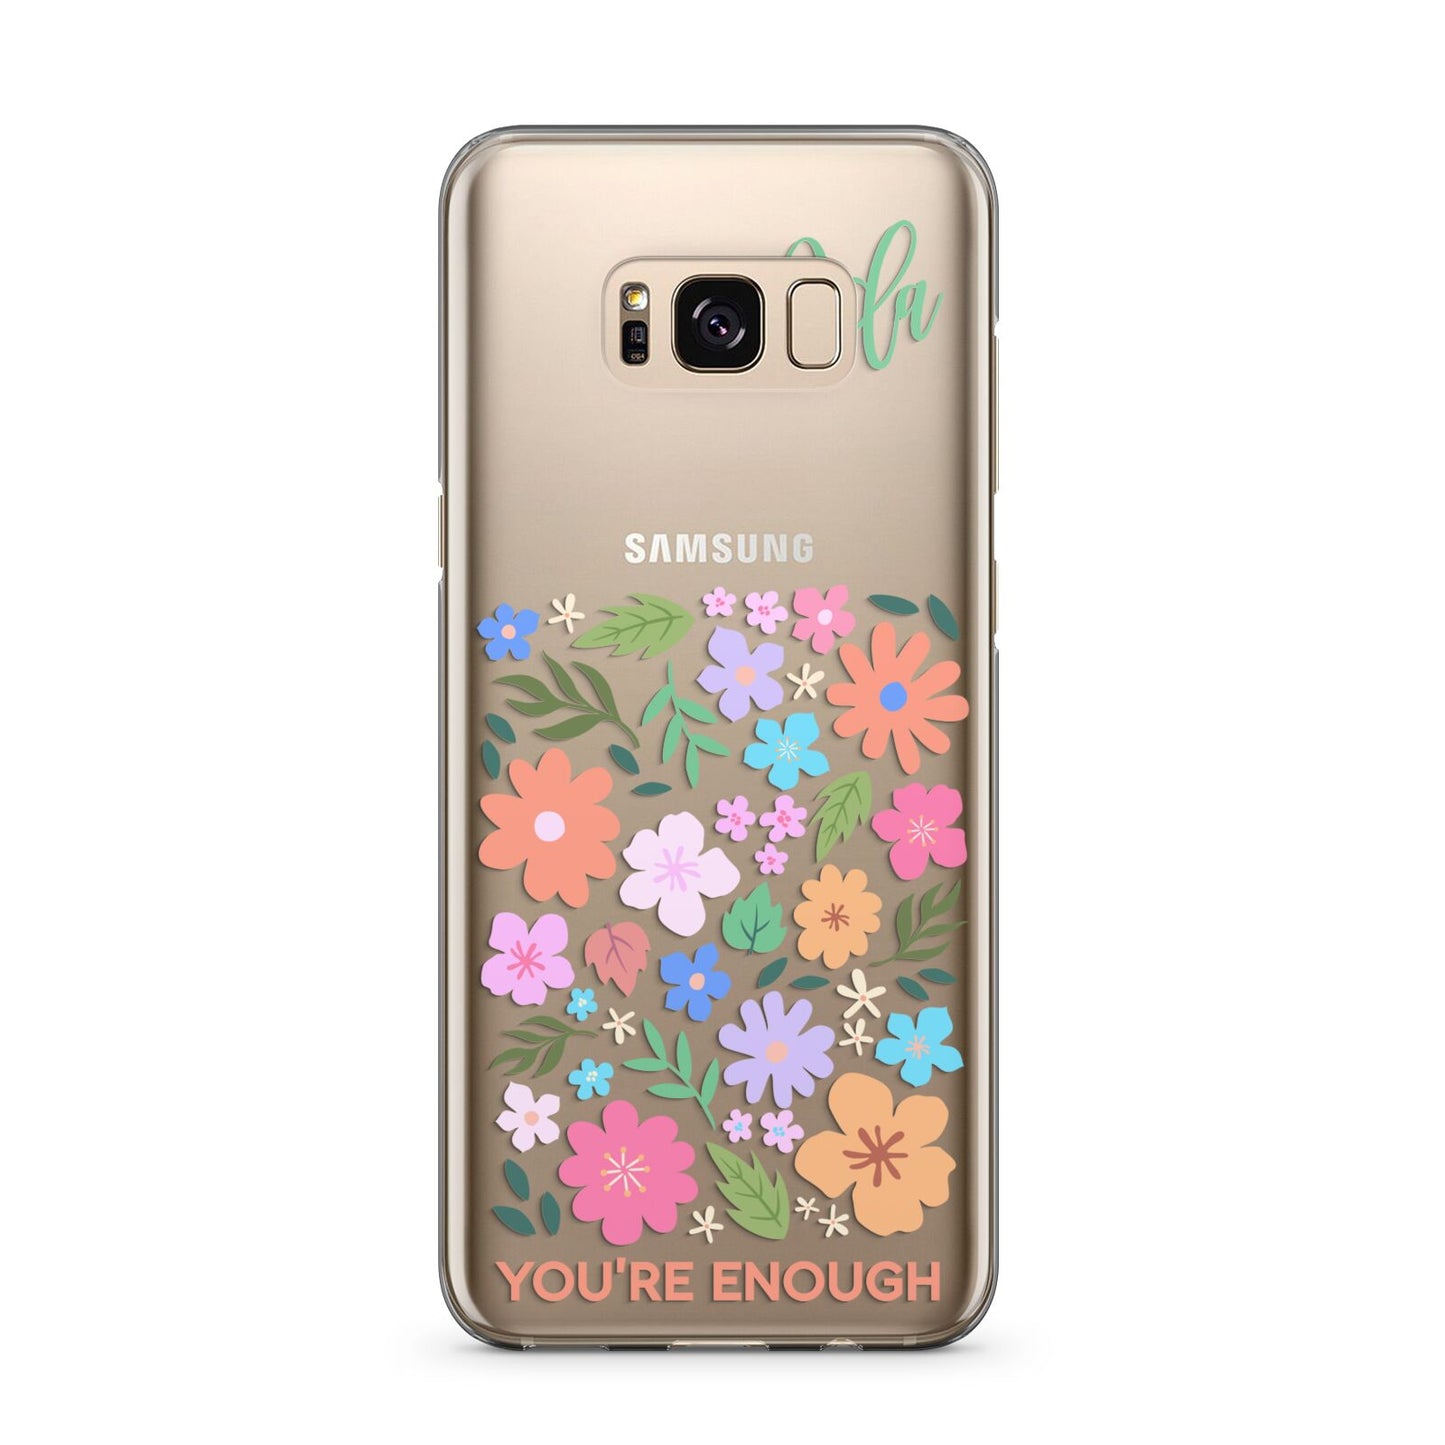 Floral Poster Samsung Galaxy S8 Plus Case